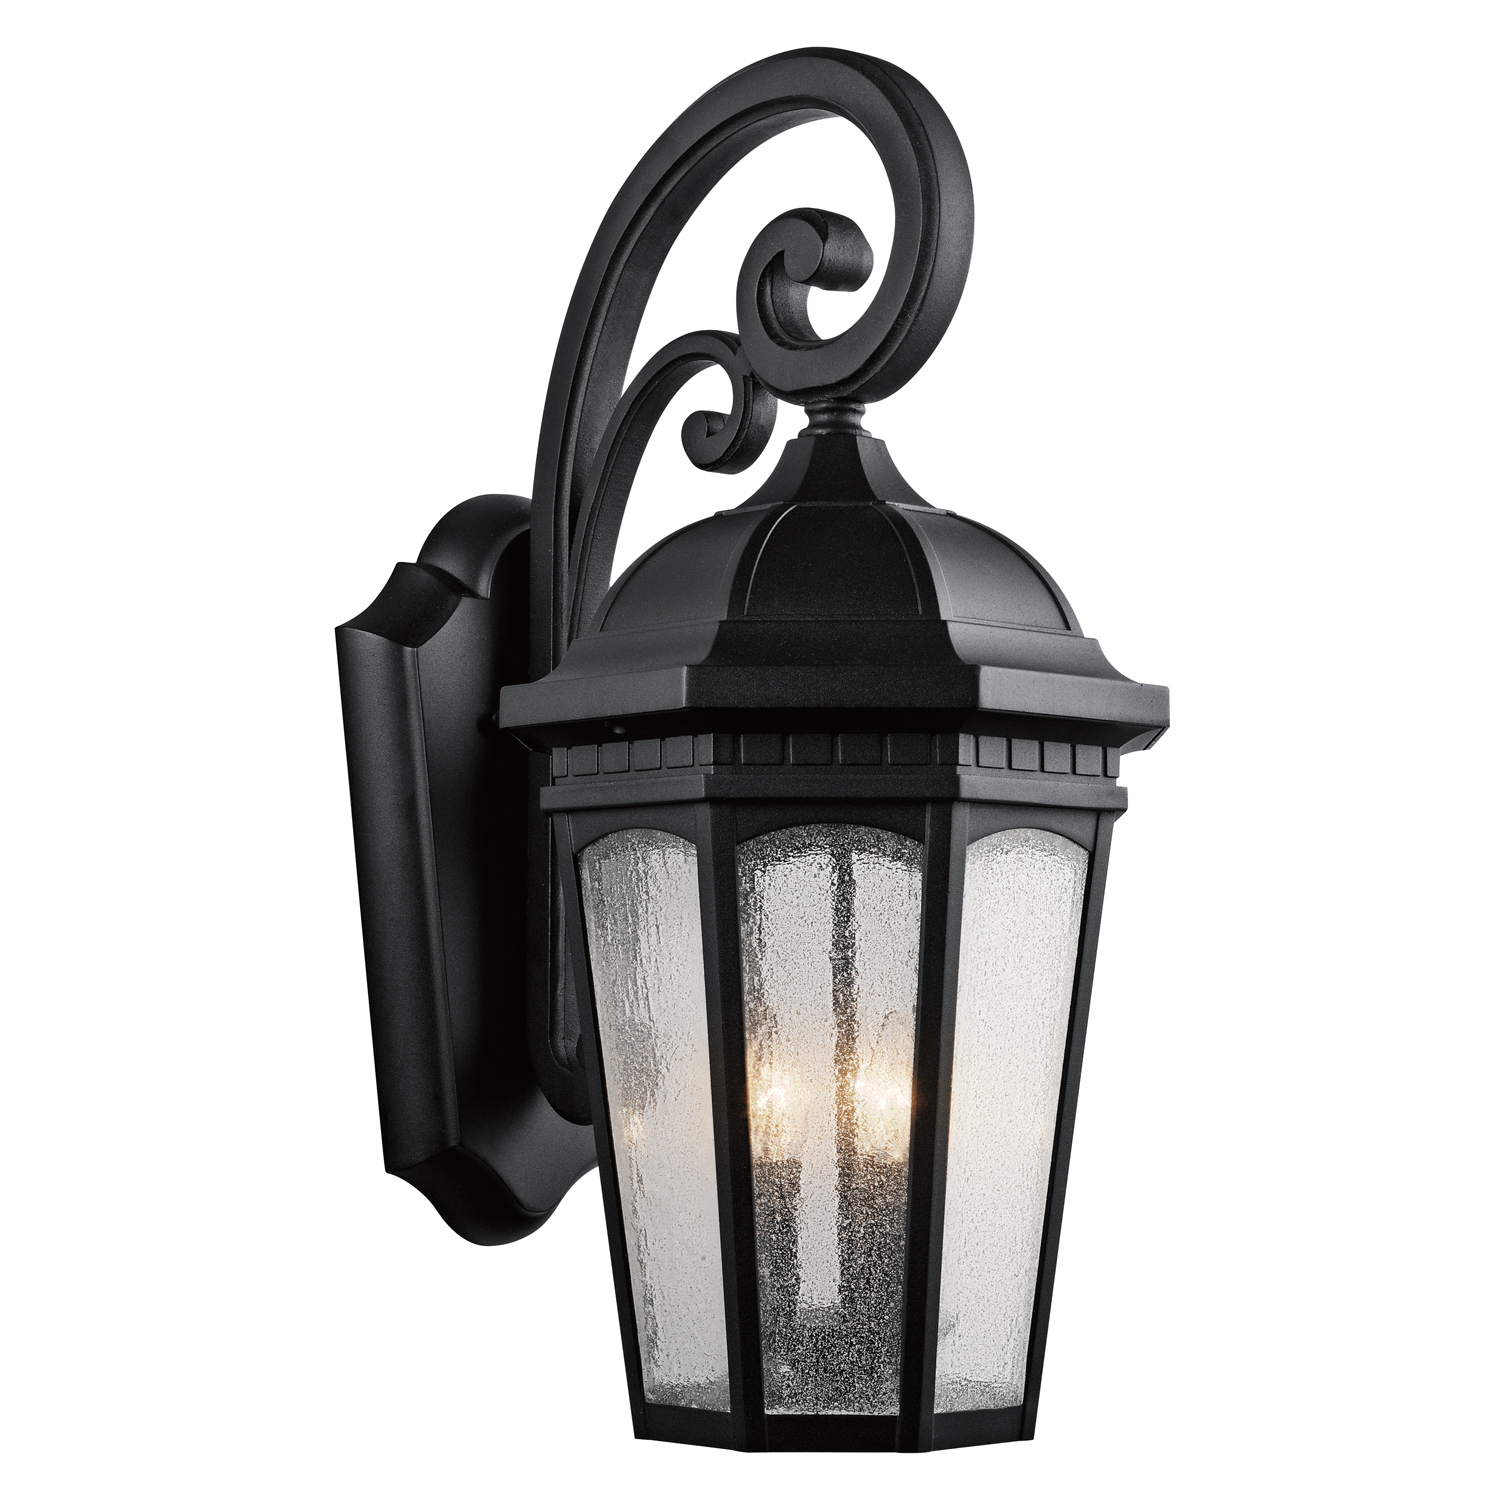 Uncluttered and traditional, this 3 light outdoor wall lantern from the Courtyard(TM) collection adds the warmth of a secluded terrace to any patio or porch. Featuring a Textured Black finish and Clear Seeded Glass, this design will elevate and enhance any space.